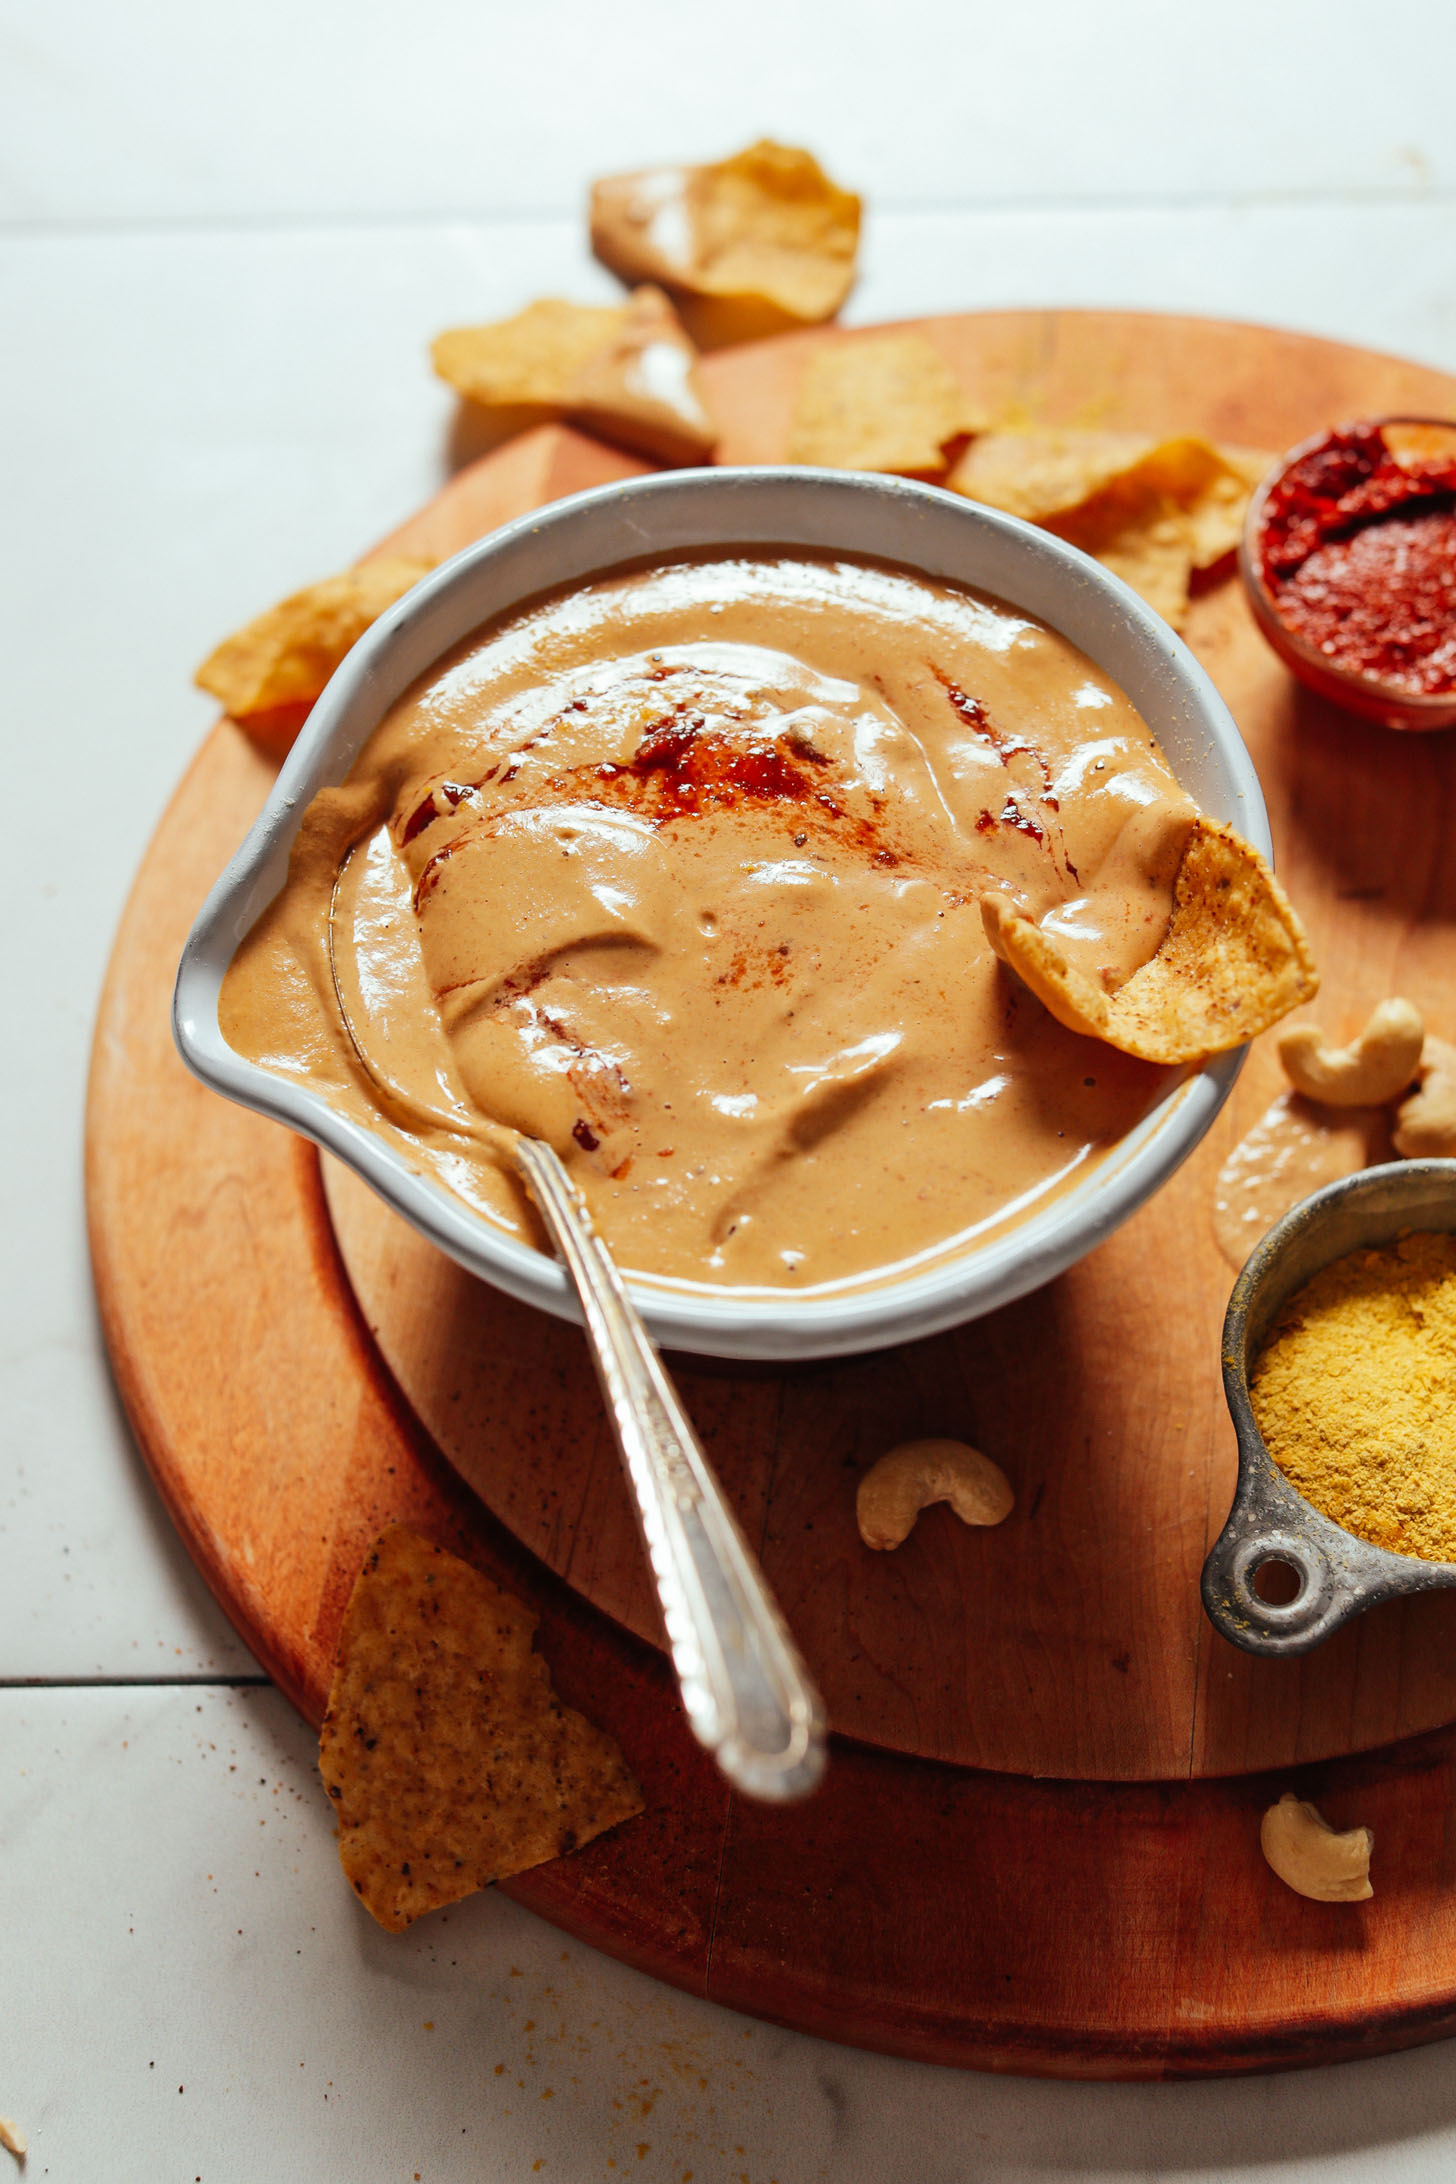 Image of vegan cashew queso in a bowl with a spoon on the left side and chip on the right side